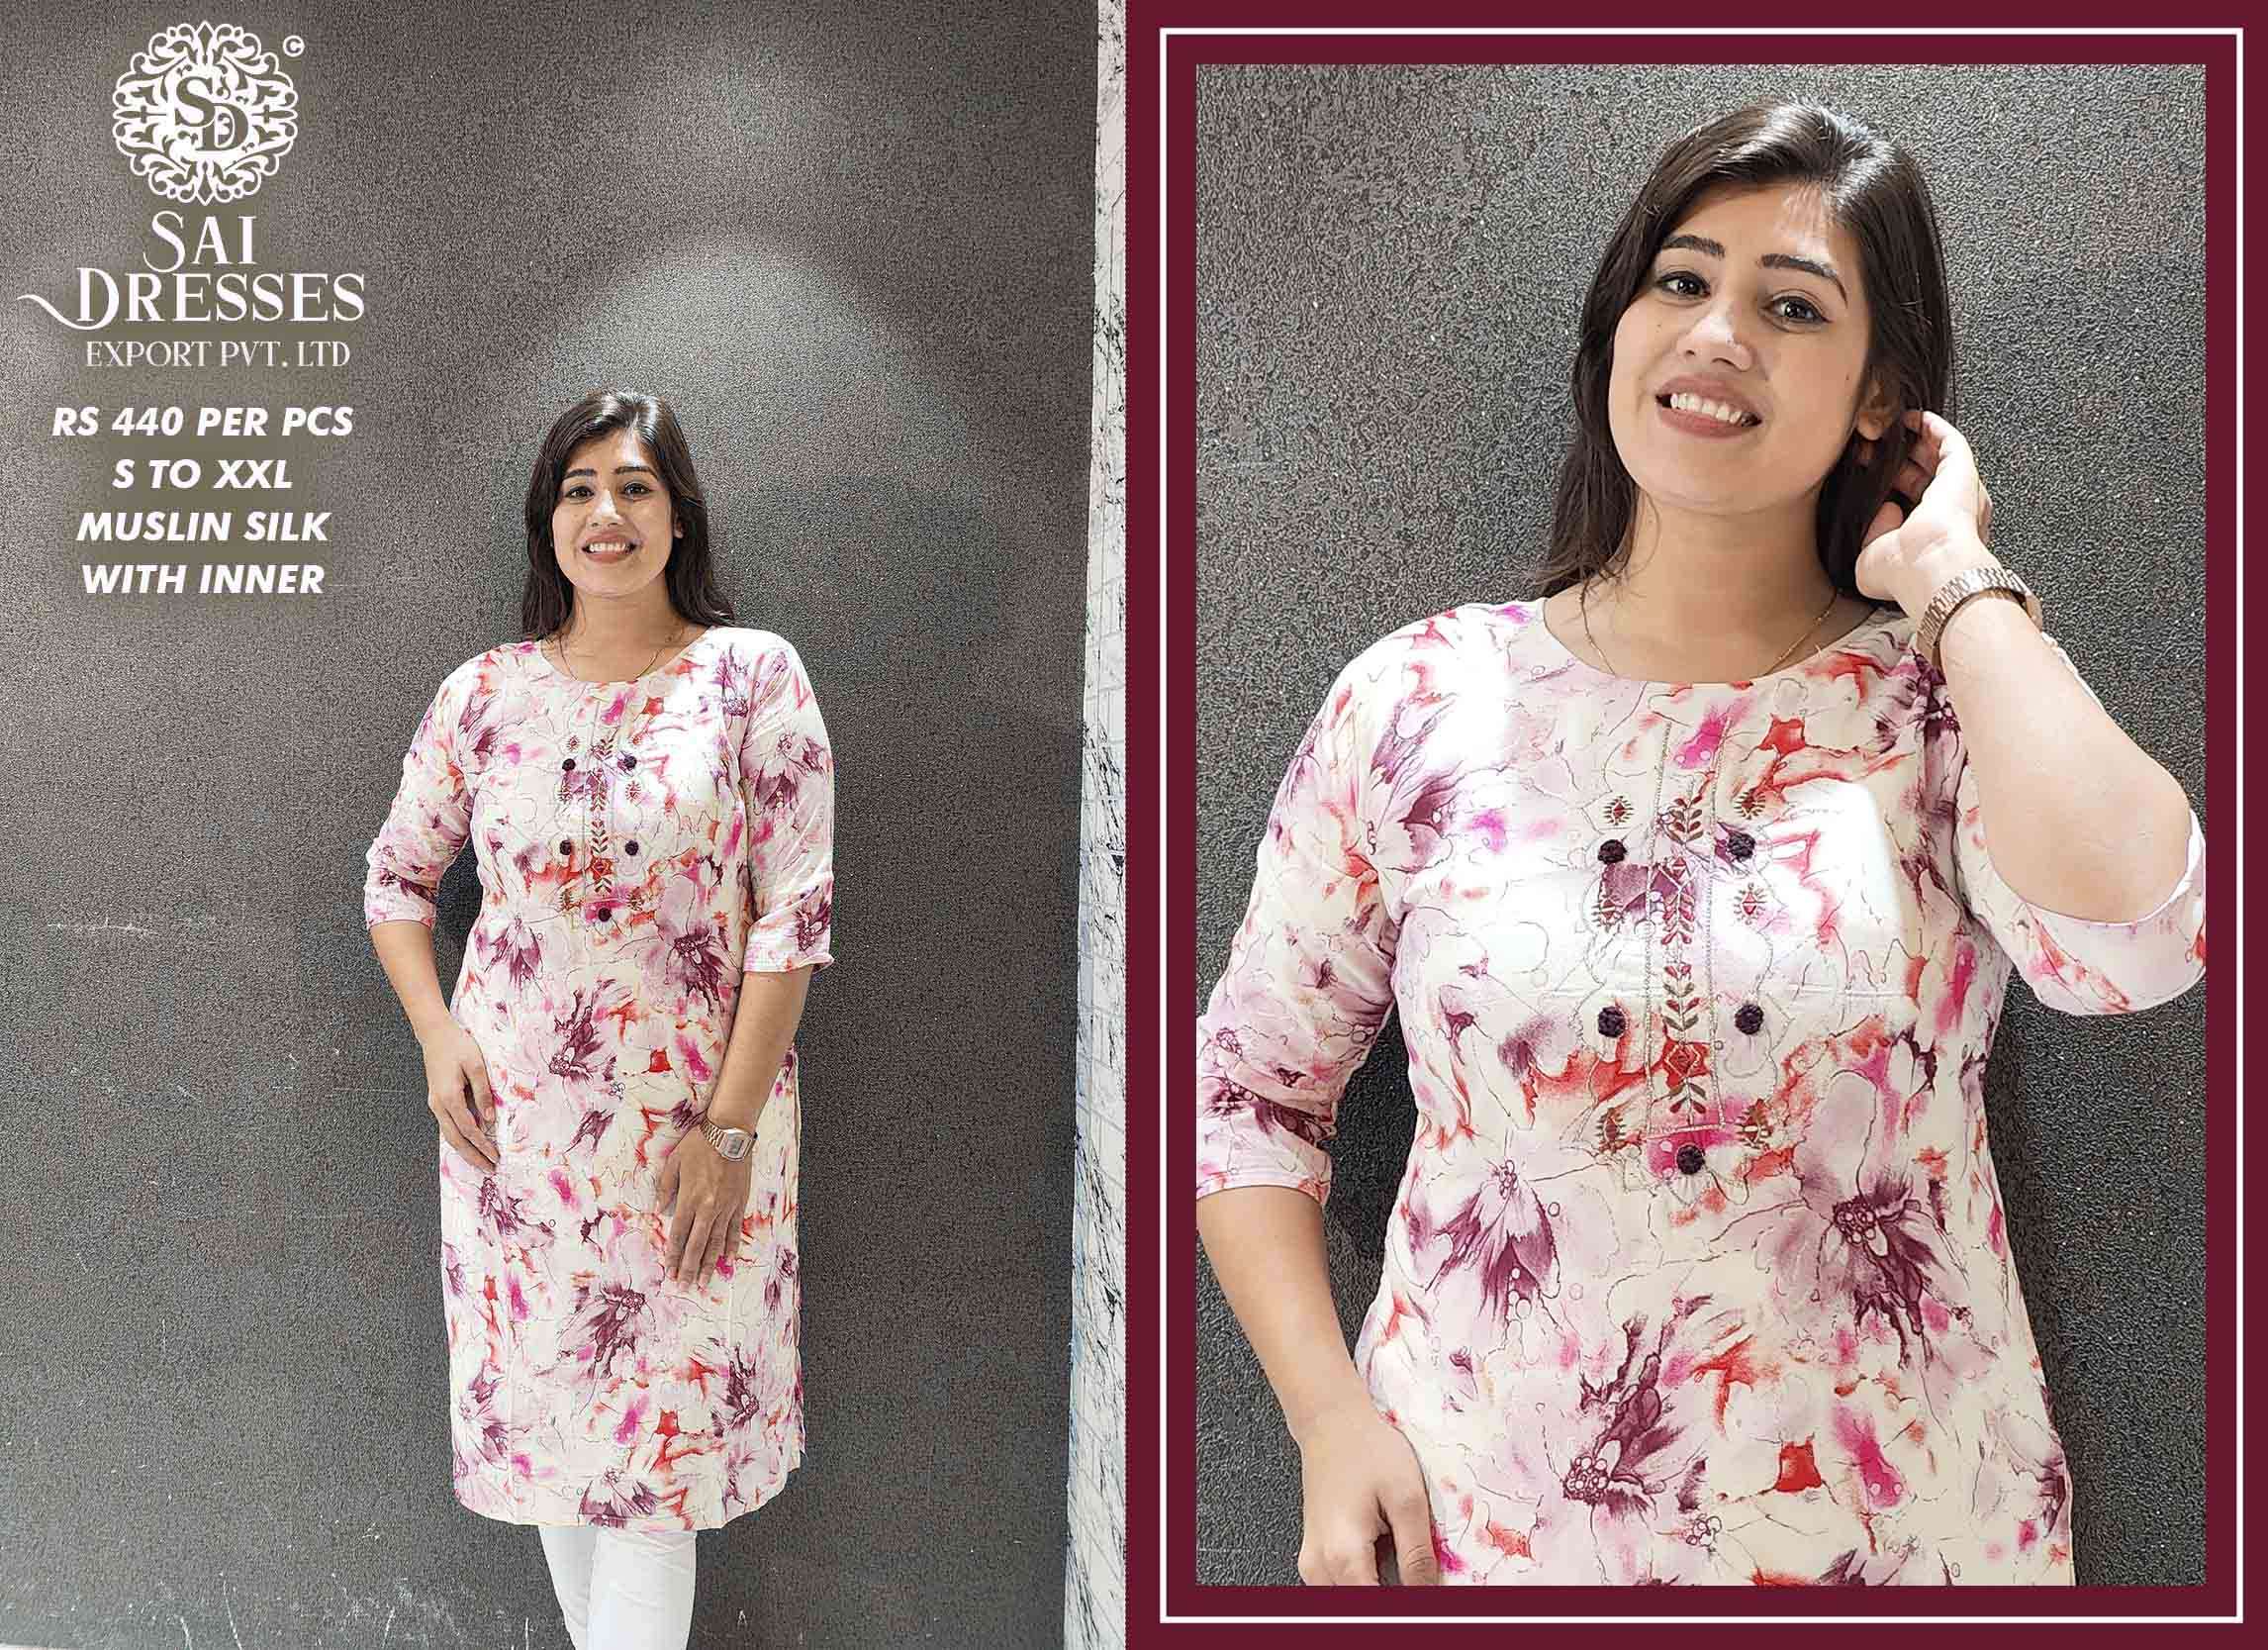 SAI DRESSES PRESENT D.NO SD41 READY TO WEAR DIGITAL PRINTED KURTI COMBO COLLECTION IN WHOLESALE RATE IN SURAT